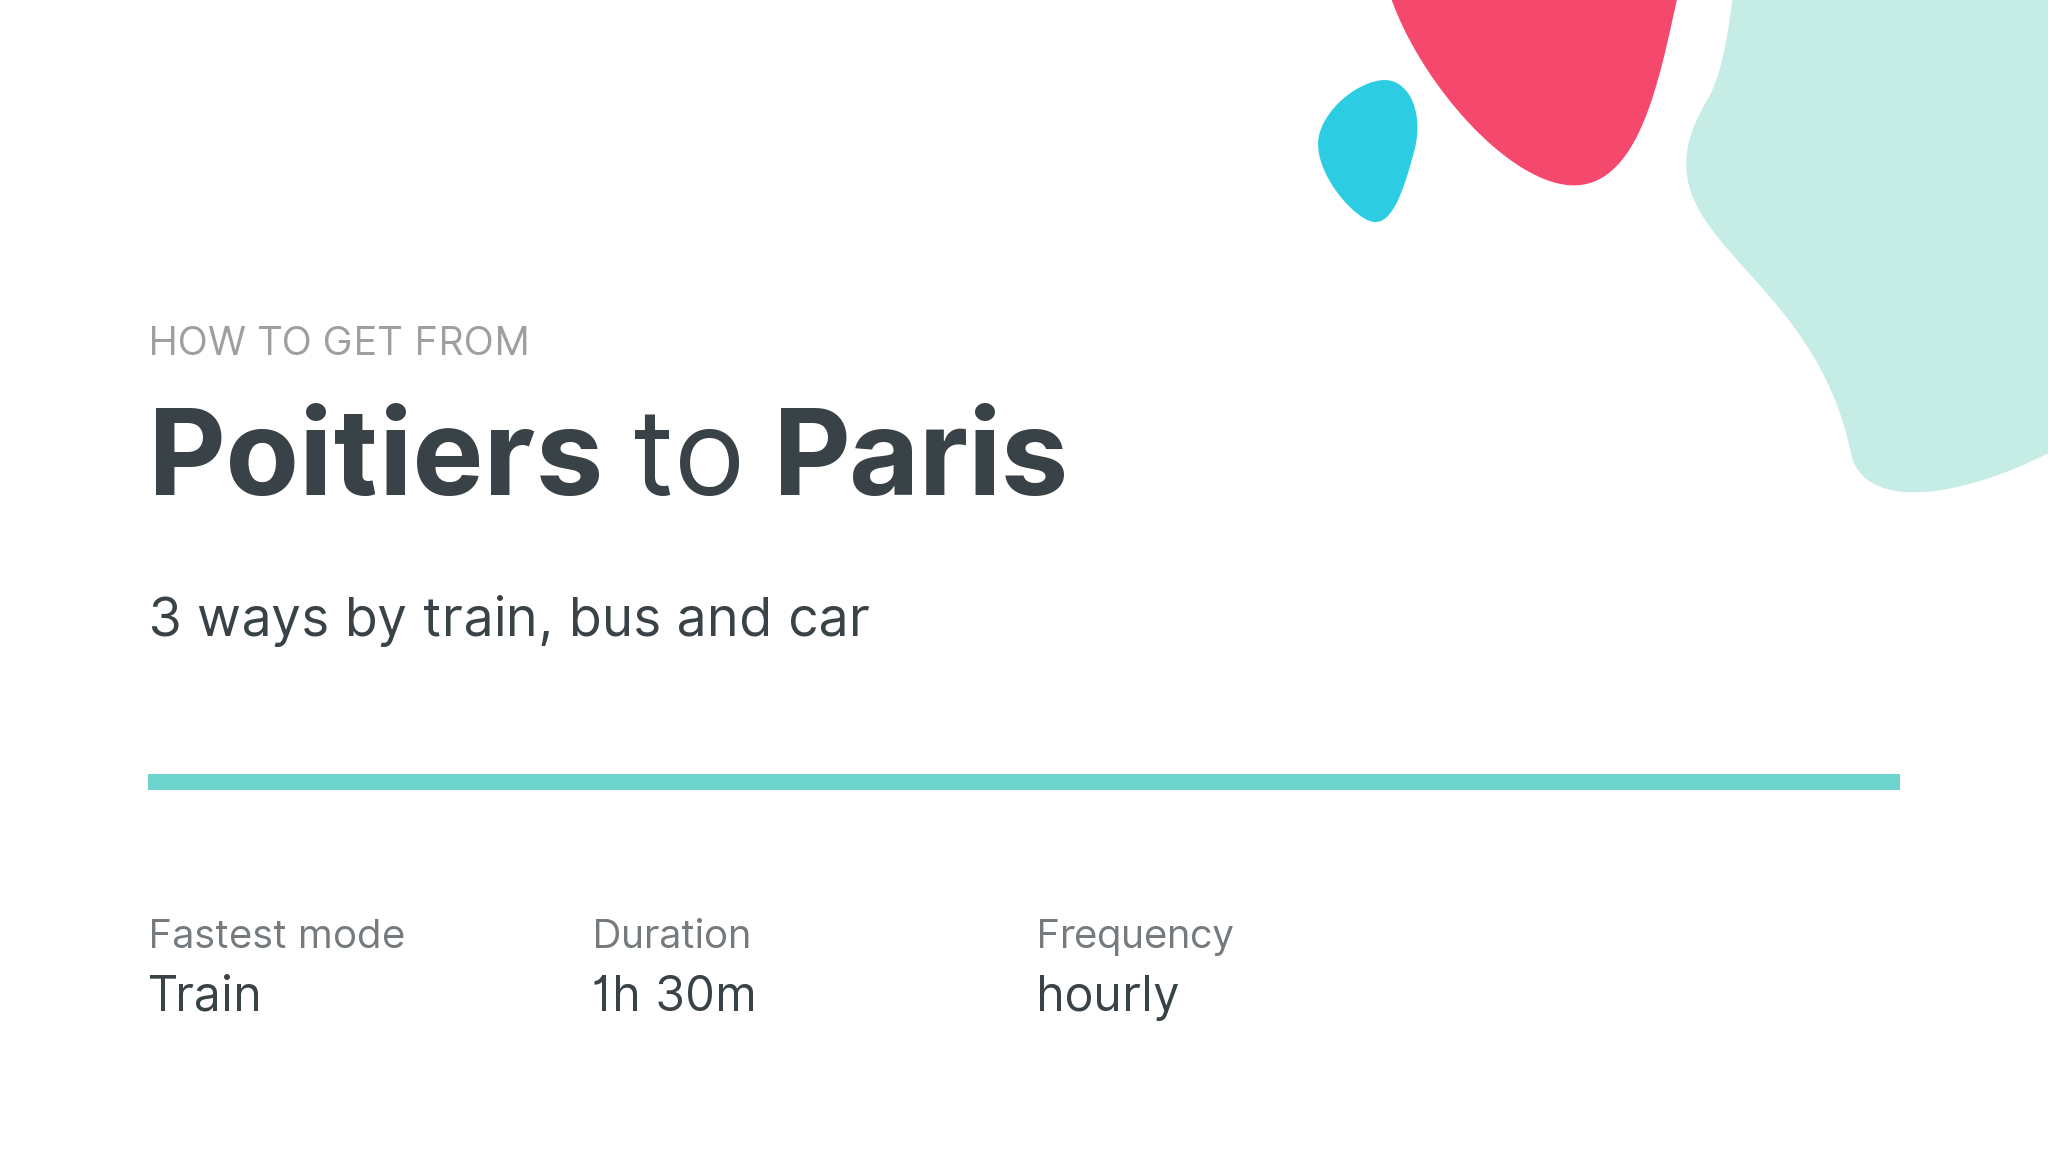 How do I get from Poitiers to Paris